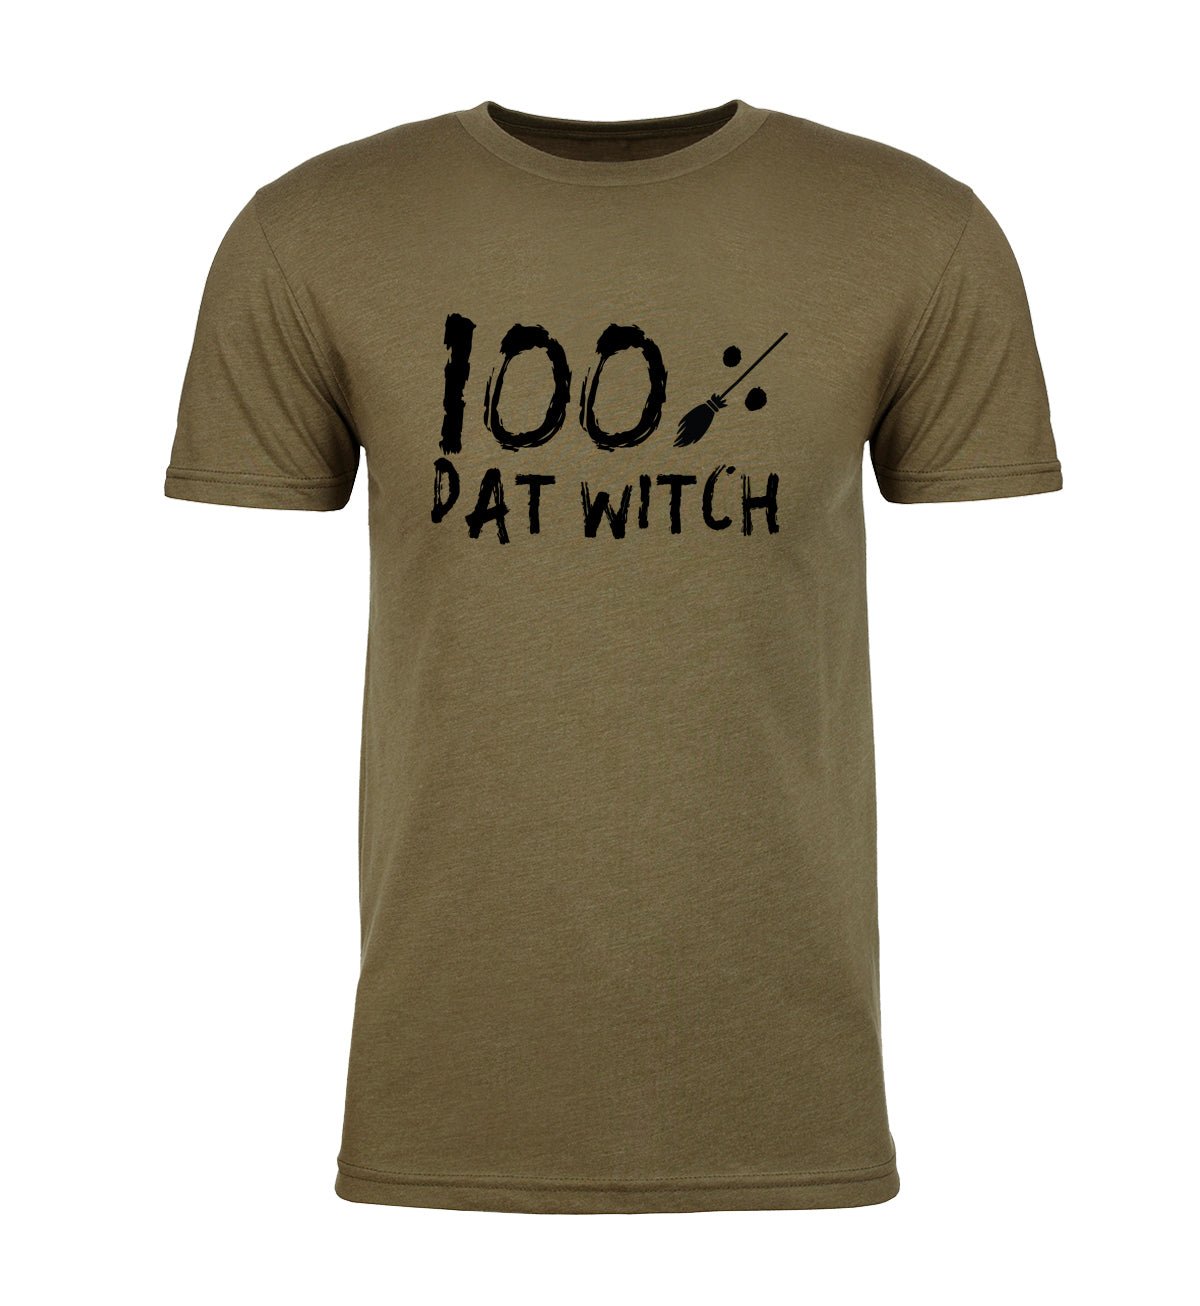 Shirt - 100% Dat Witch T-shirts, Men's Graphic Tees, Funny Halloween Shirts Mens